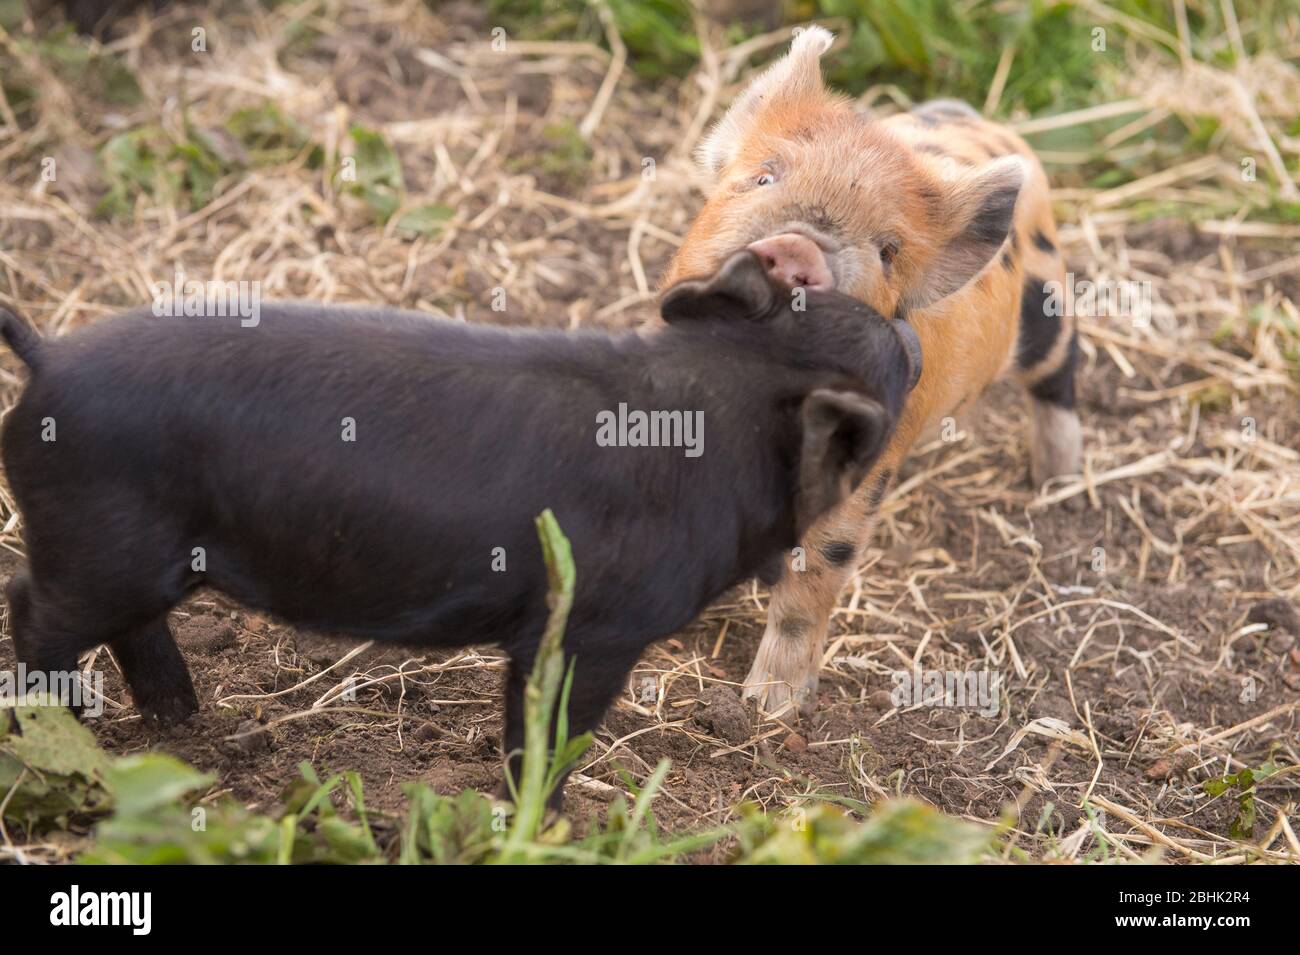 Cumbernauld, UK. 26th Apr, 2020. Pictured: Cute spring piglets play in warmth of the afternoon spring sunshine. These small pigs have had their bacon saved as the Coronavirus (COVID-19) lockdown has meant things on the farm have ground to a halt, leaving animals to enjoy a new lease of life for the time being. Credit: Colin Fisher/Alamy Live News Stock Photo